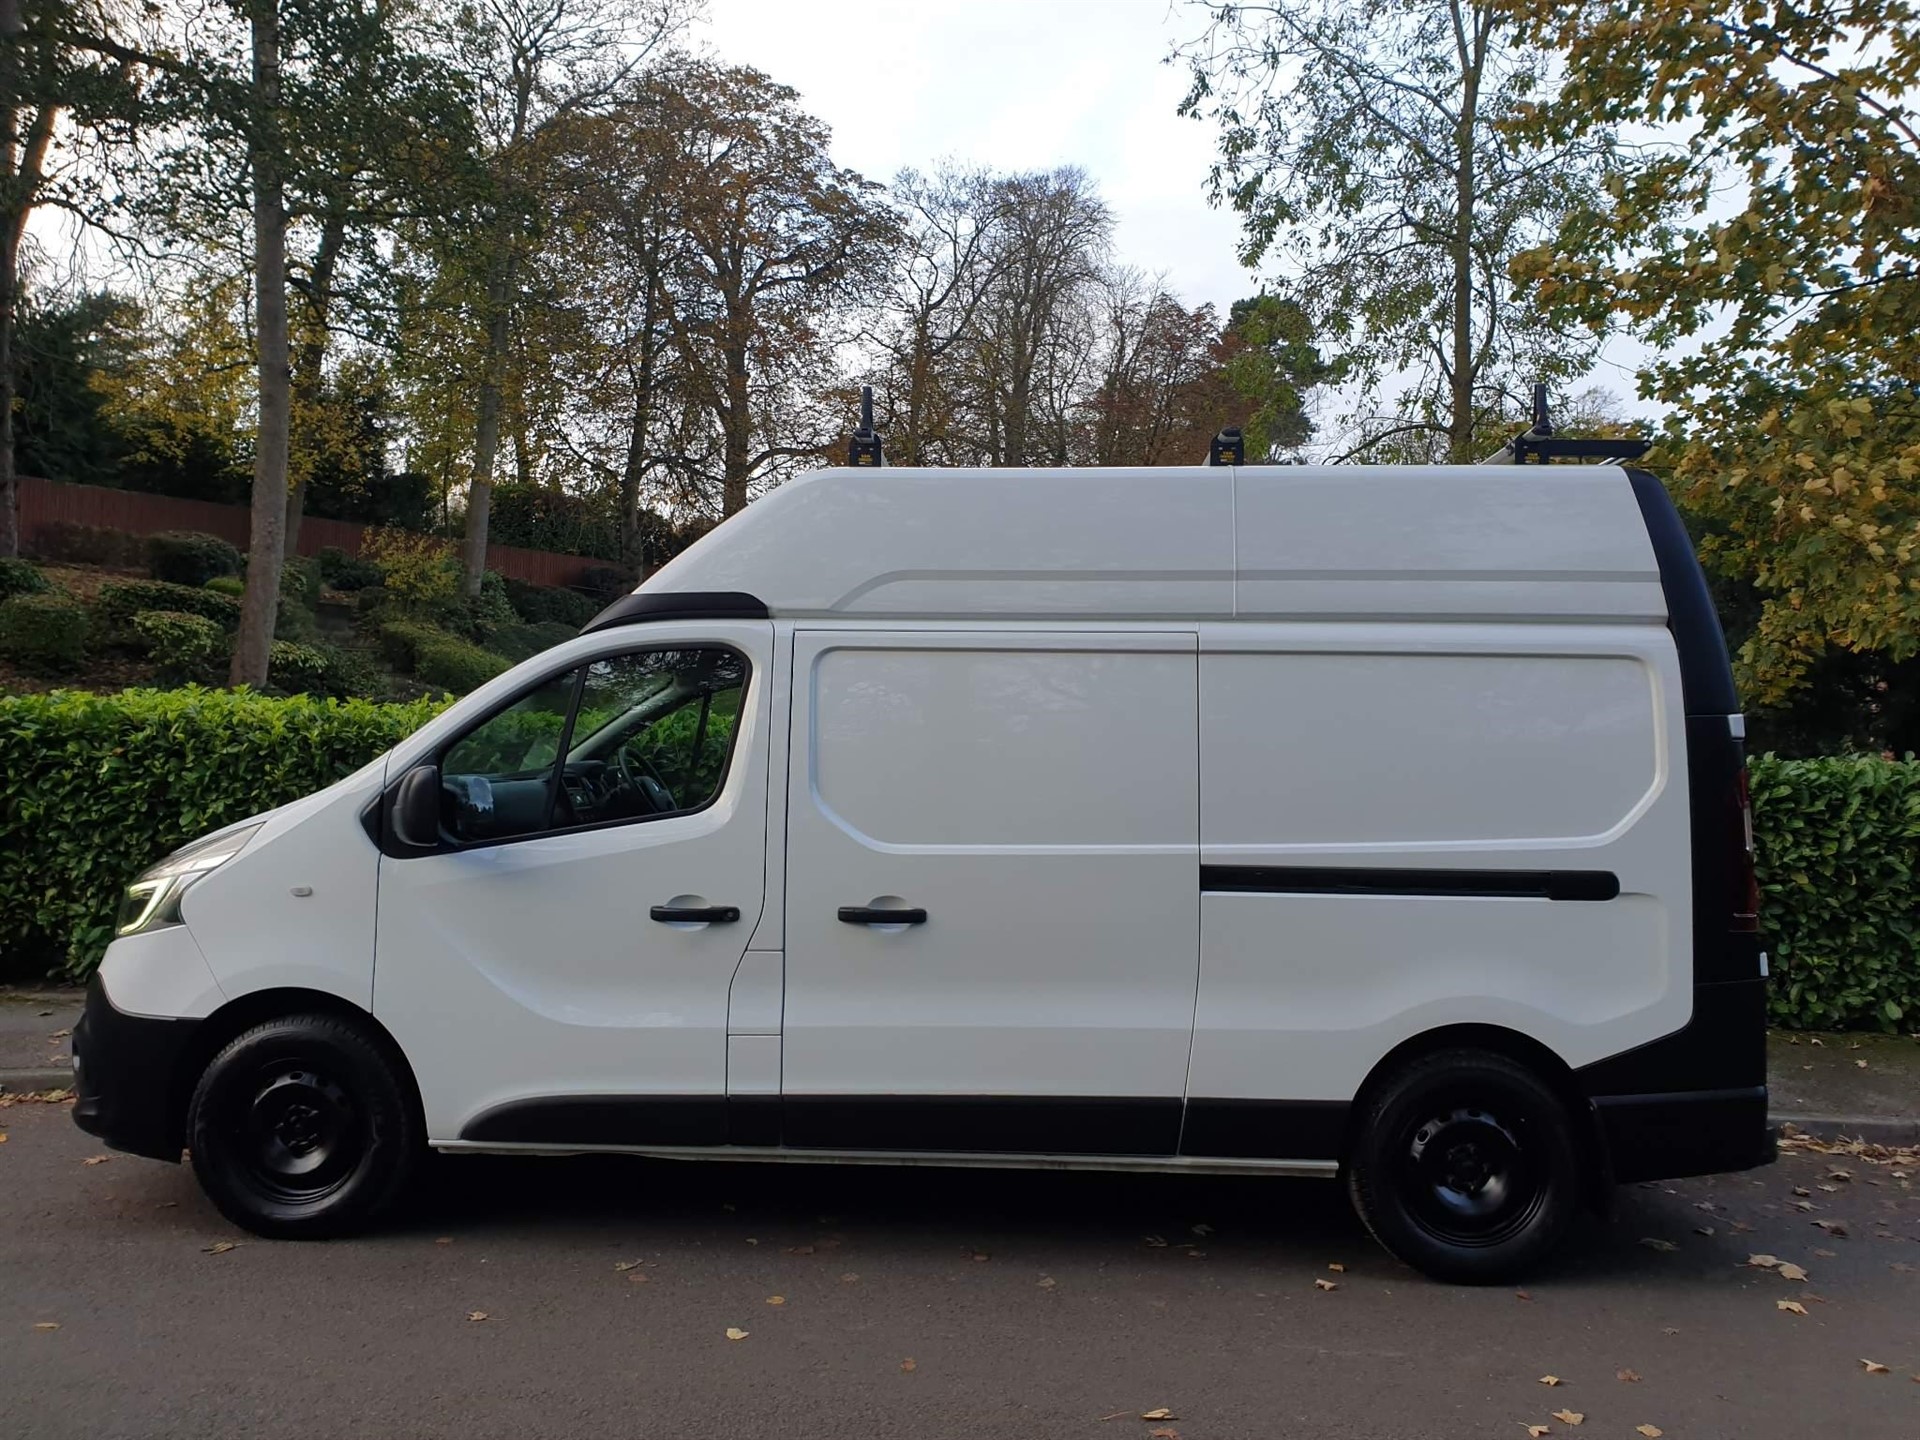 Used Renault Trafic for sale in York, North Yorkshire